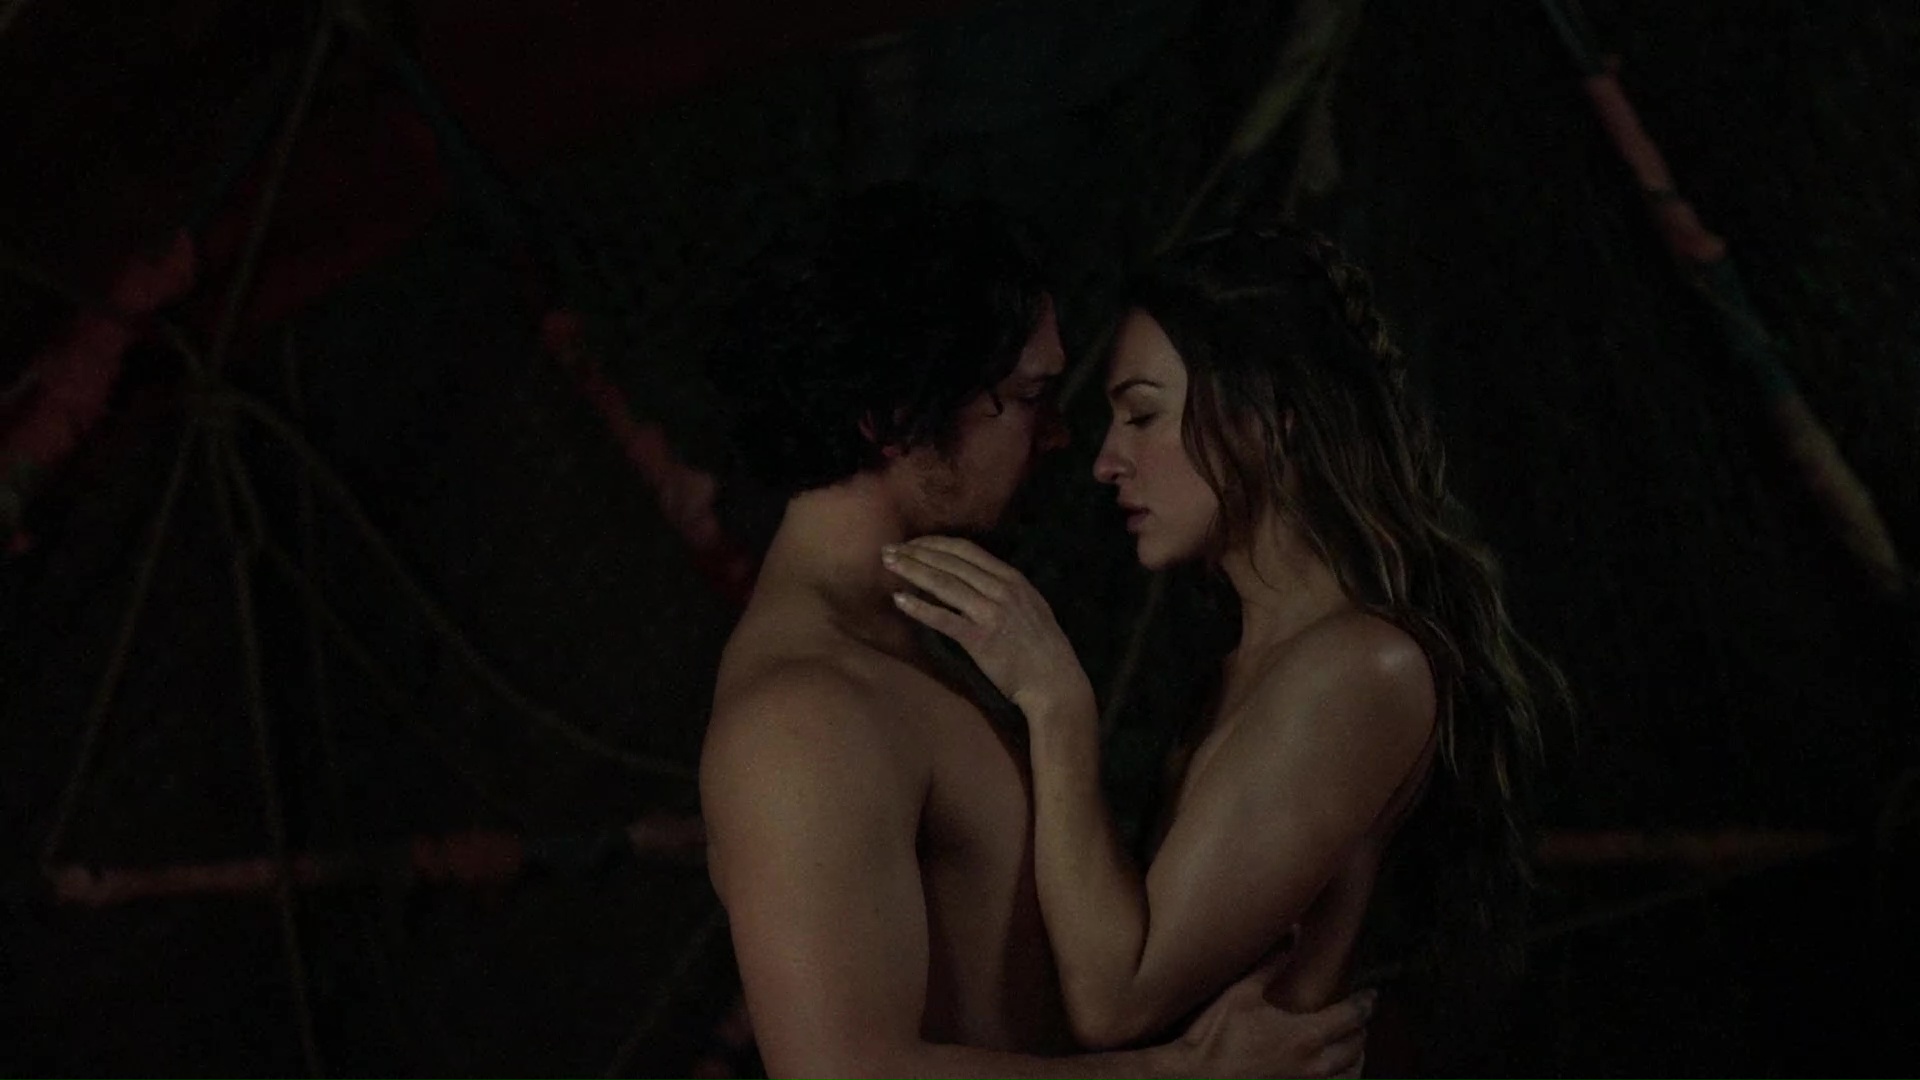 Bob Morley shirtless in The 100 5-06 "Exit Wounds" .